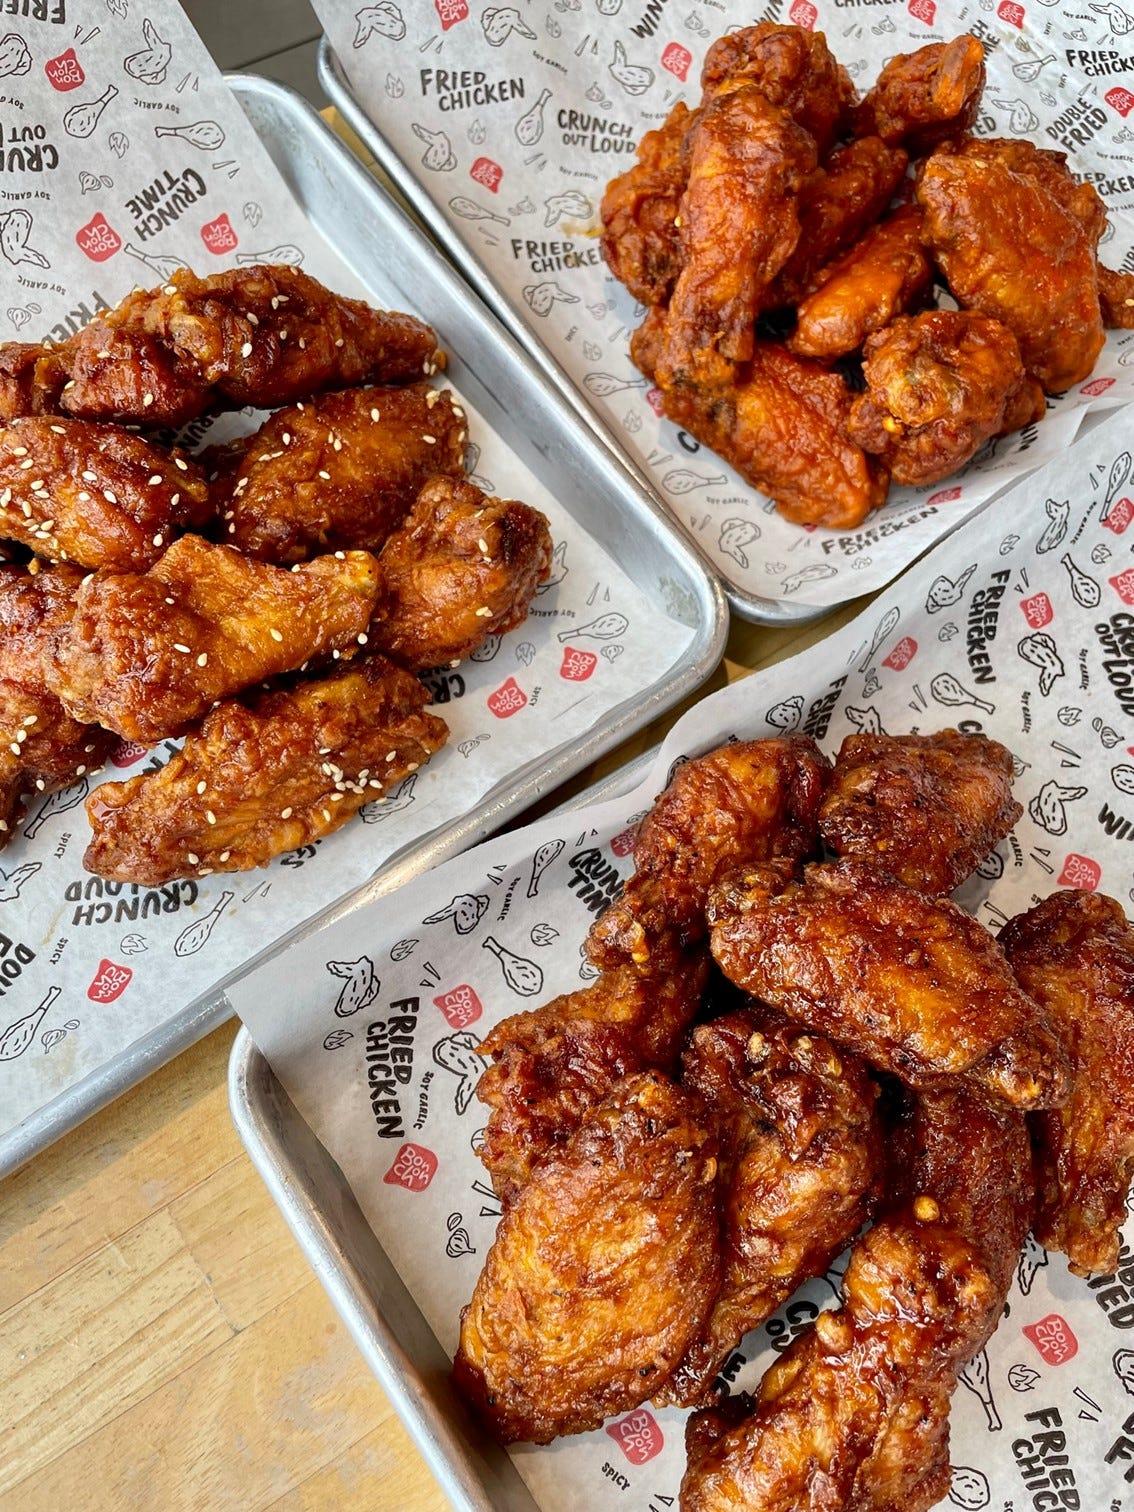 Fast-casual Asian fusion chain Bonchon has a limited time Try Tri deal (through Sunday, July 30), with 15 wings, five each with the restaurant